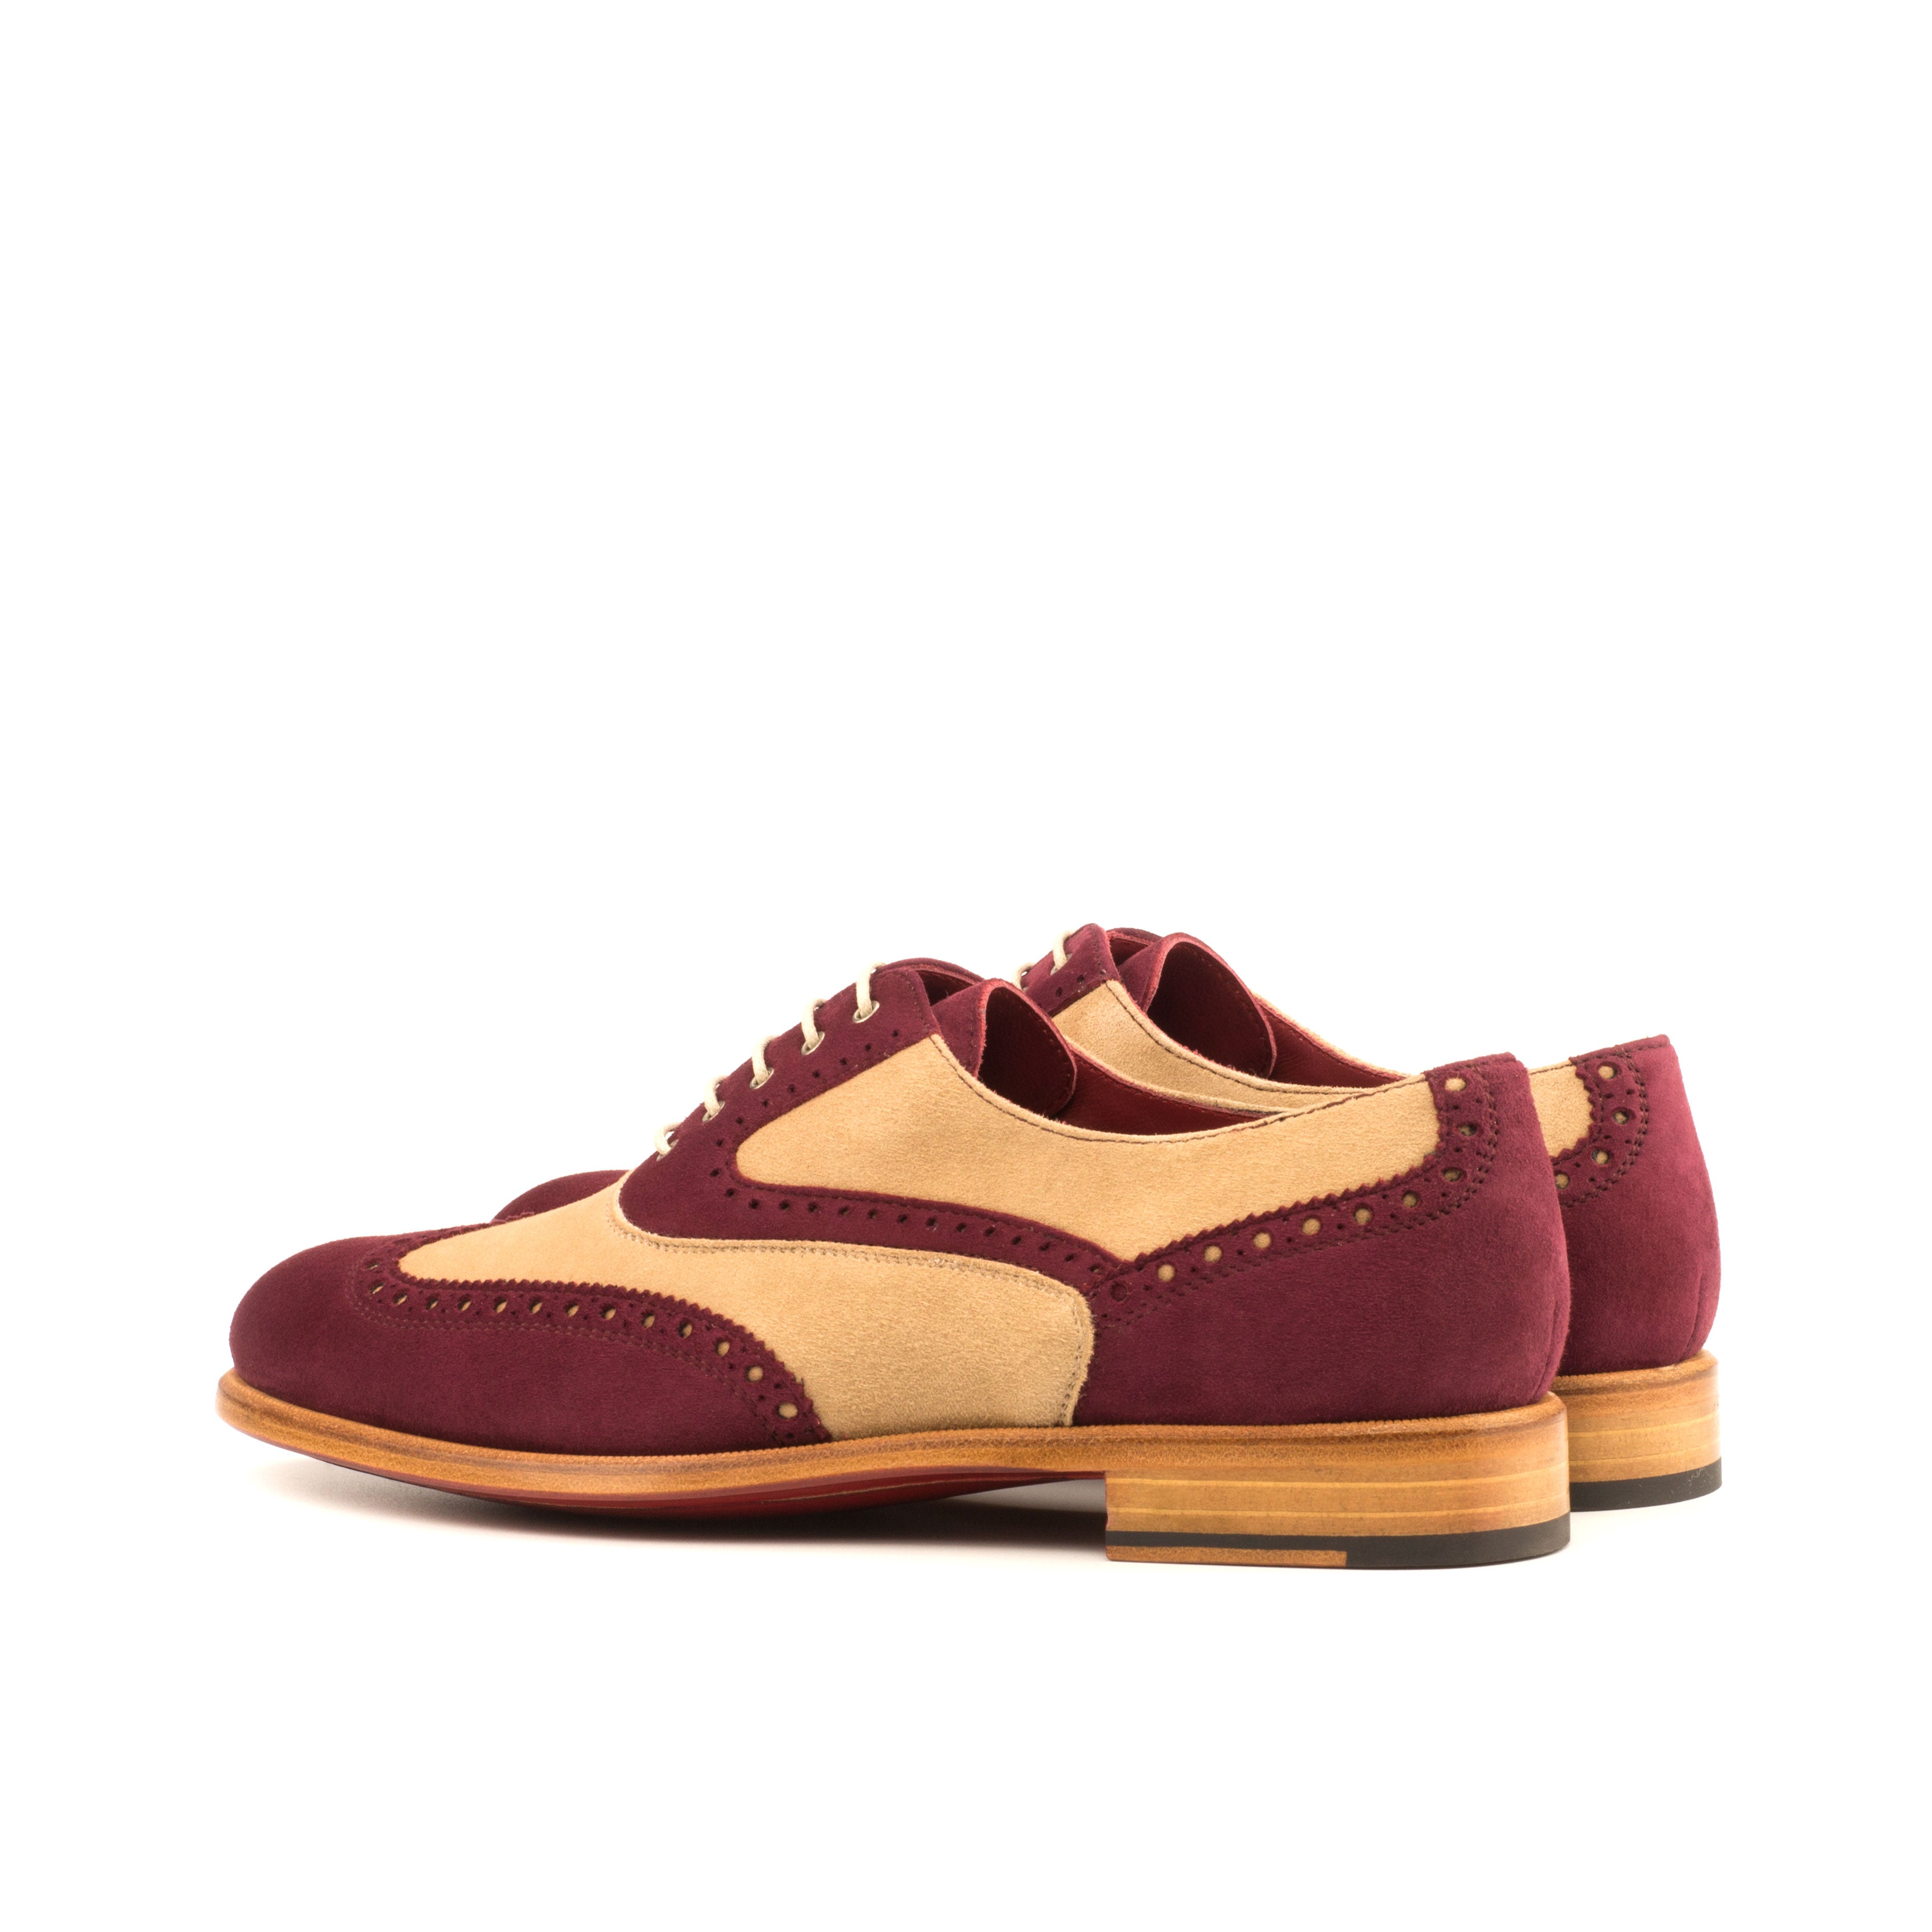 Taupe & Wine Kid Suede Full Brogue